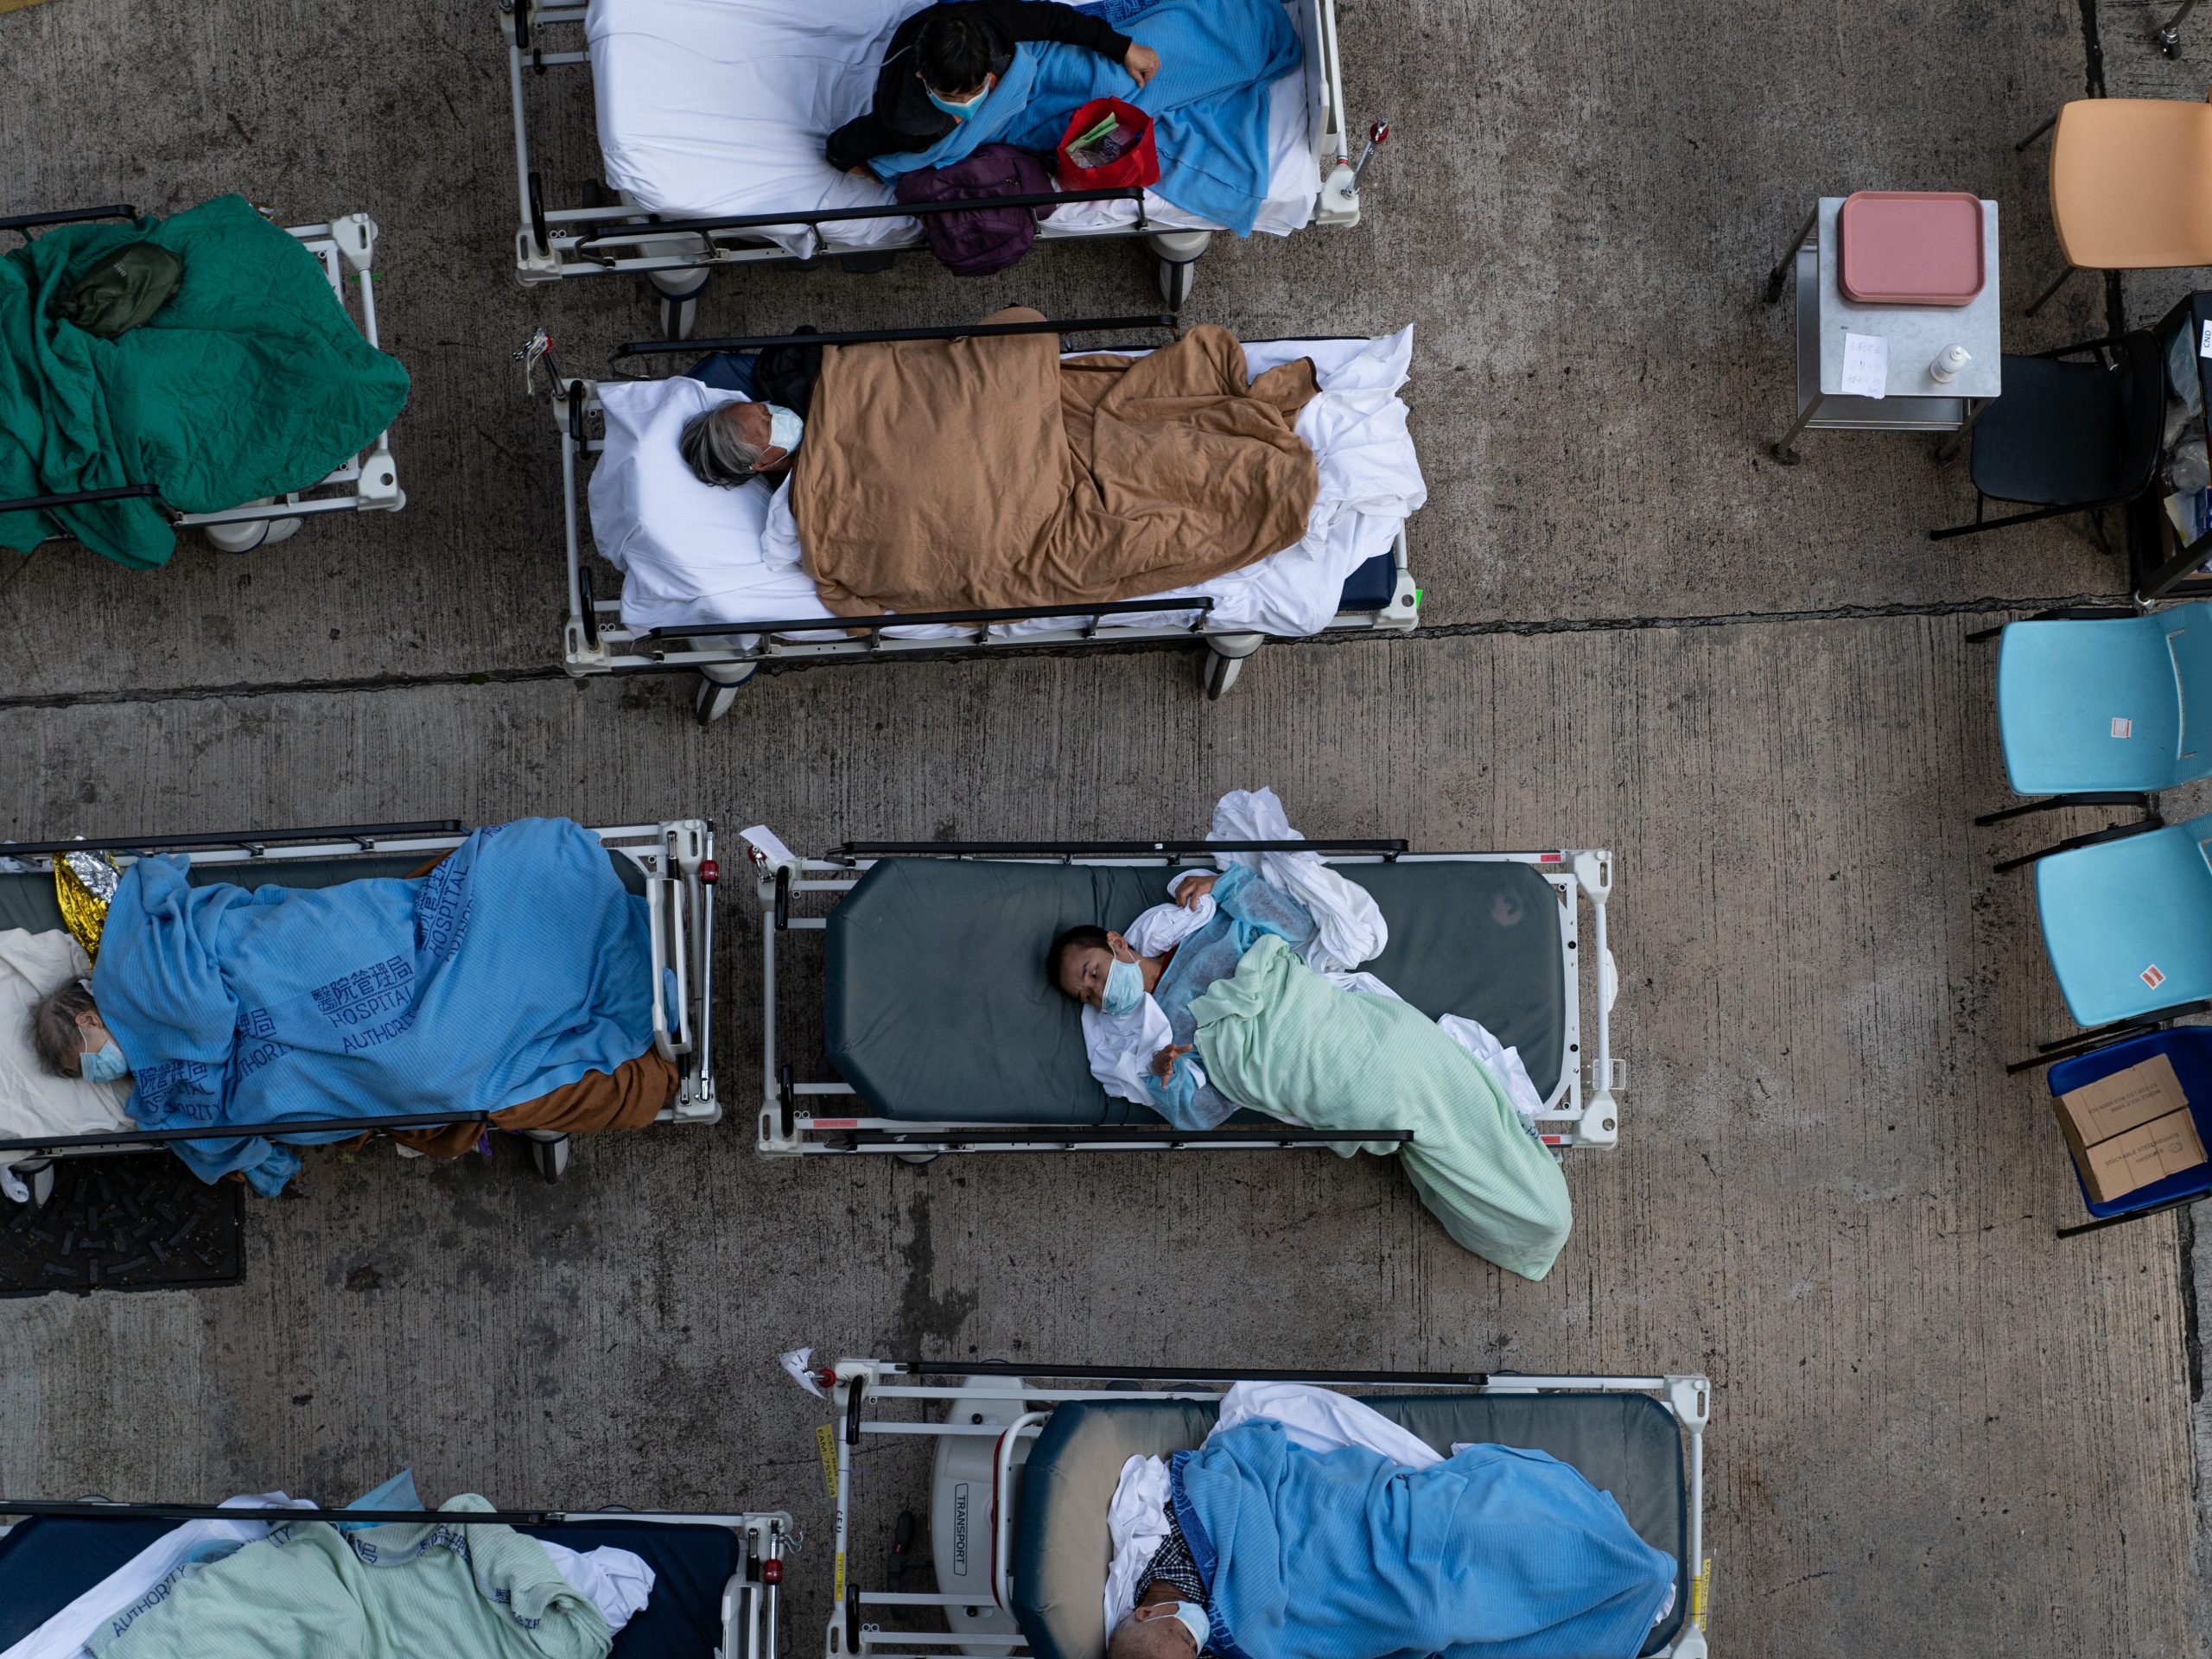 On February 16, 2022, a patient lies in a hospital bed waiting for medical treatment in a temporary shelter outside the Caritas Medical Center in Hong Kong, China, while medical staff take care of the patient.